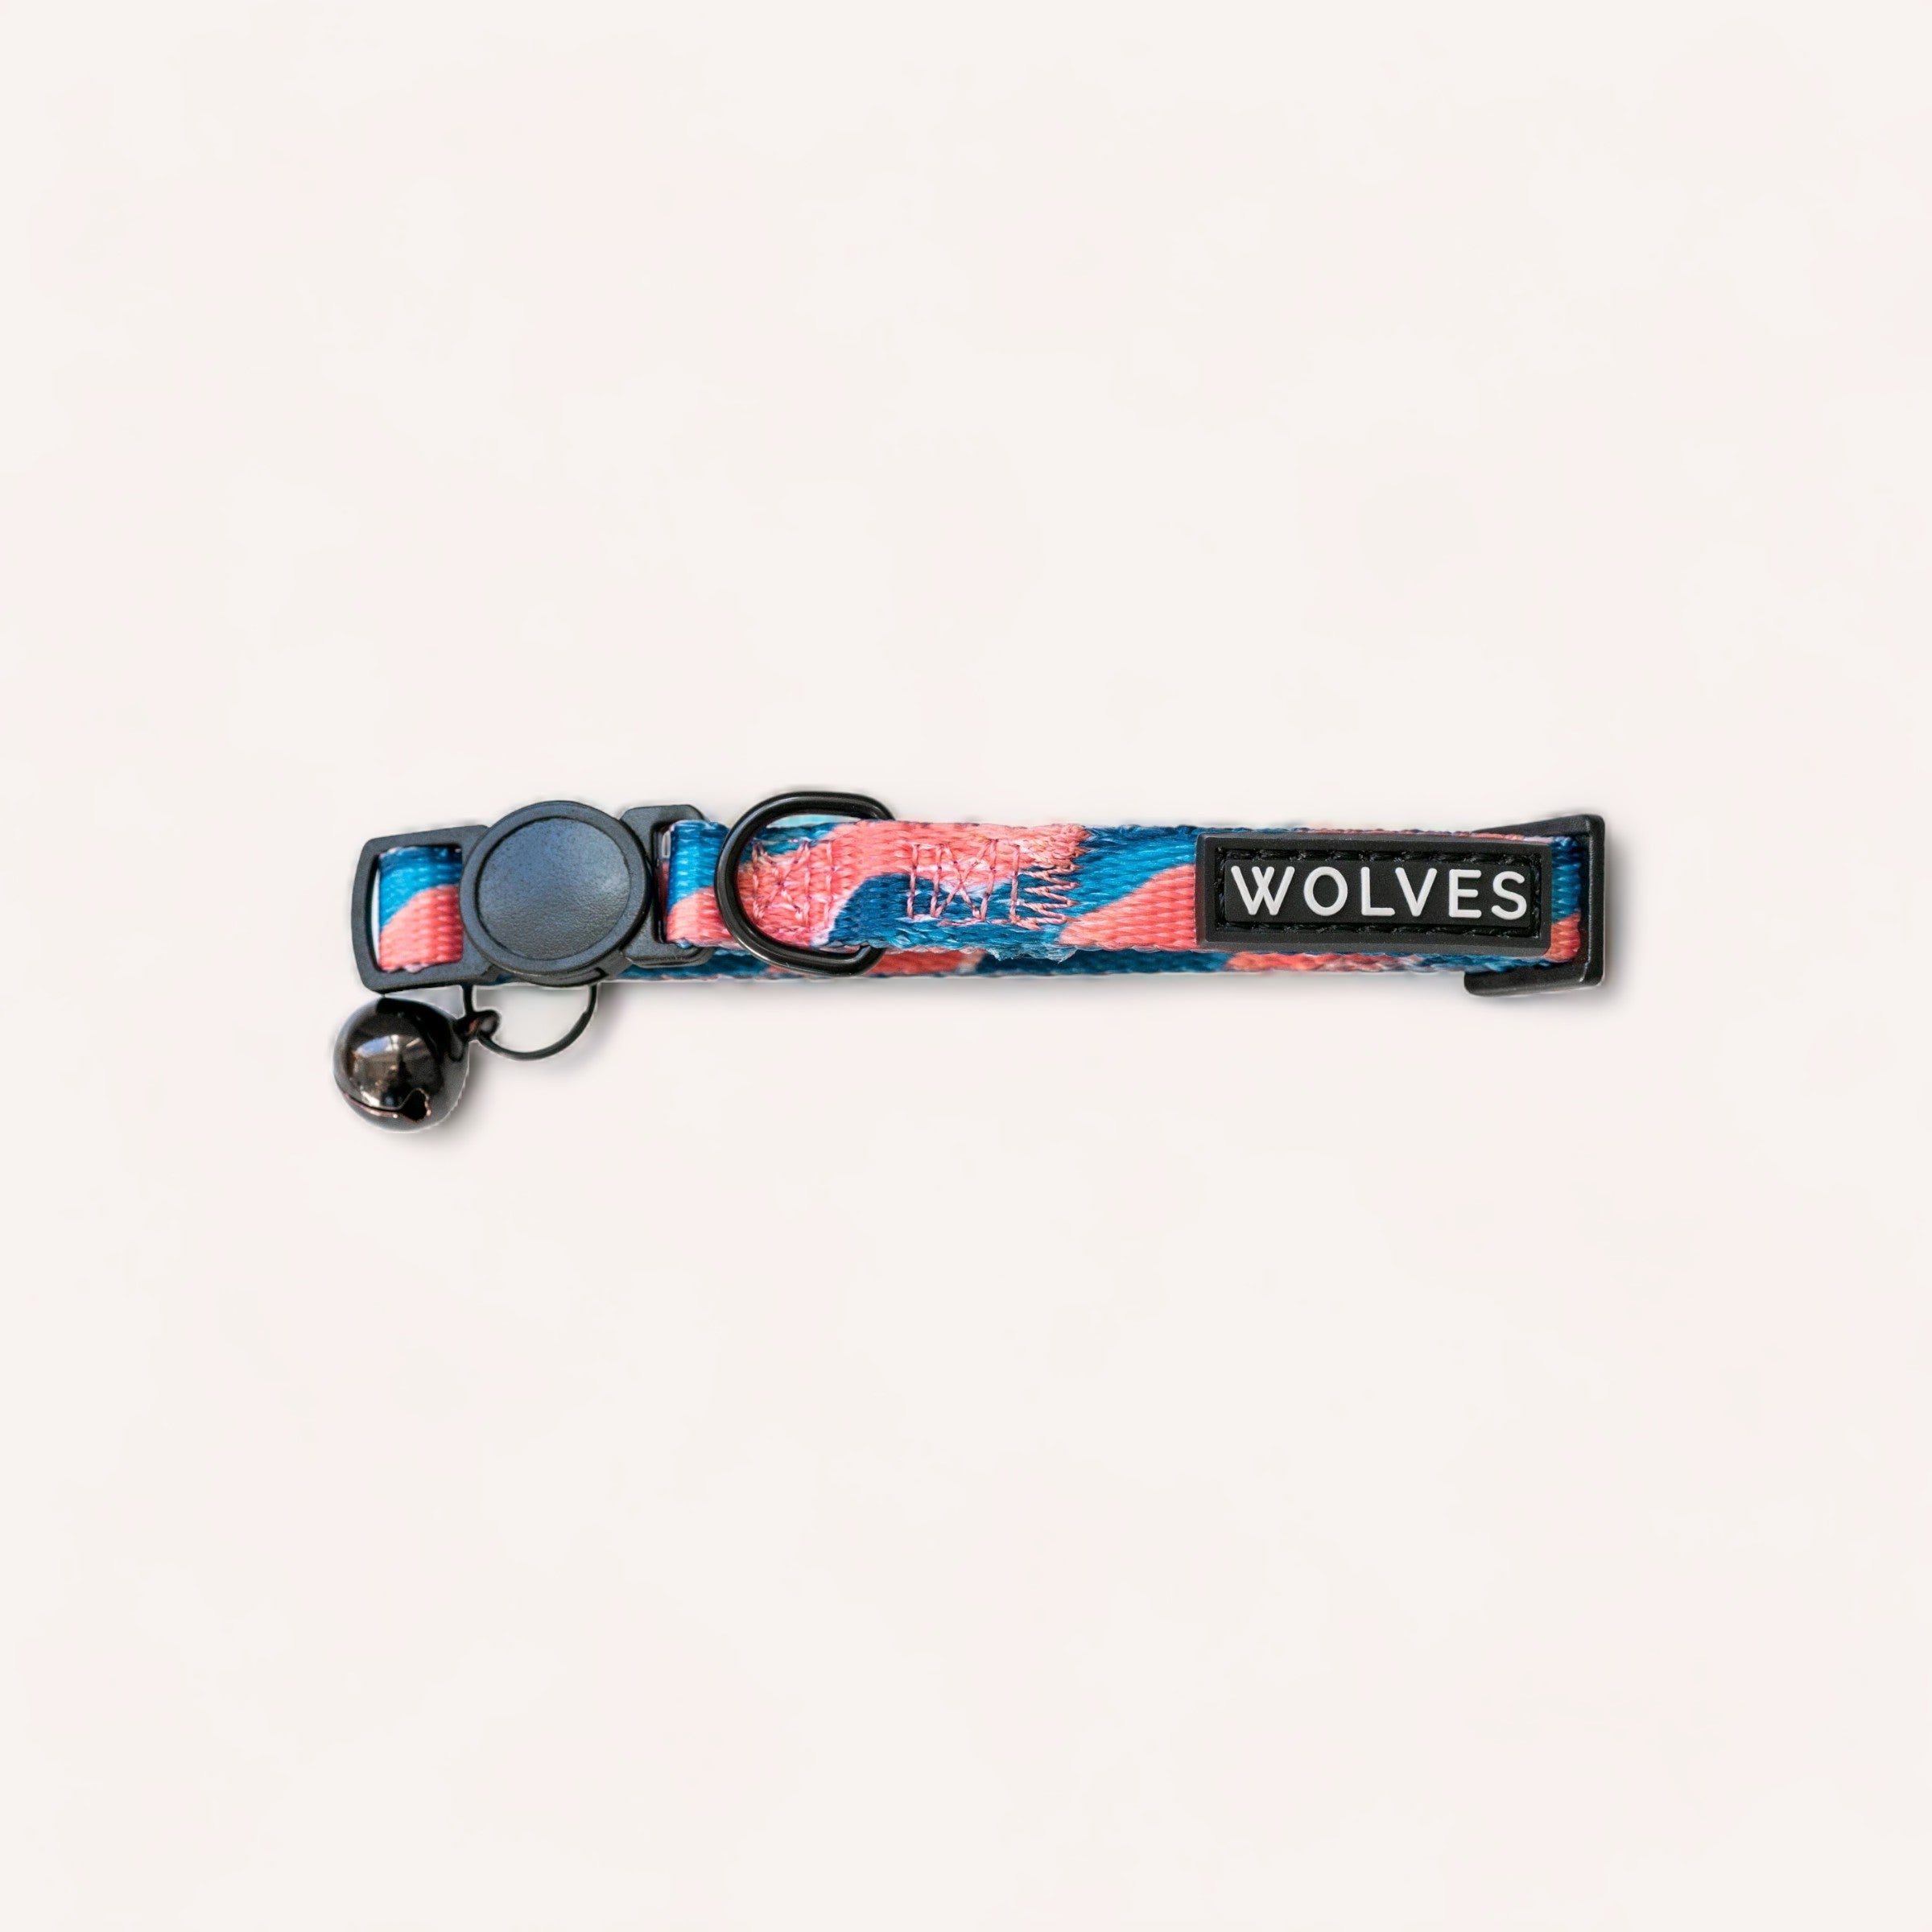 A colorful Dusk Cat Collar by Wolves of Wellington with "love wolves" text in navy, pink, and earthy tones, featuring an adjustable strap, a breakaway buckle, and a d-ring for leash attachment, displayed on.